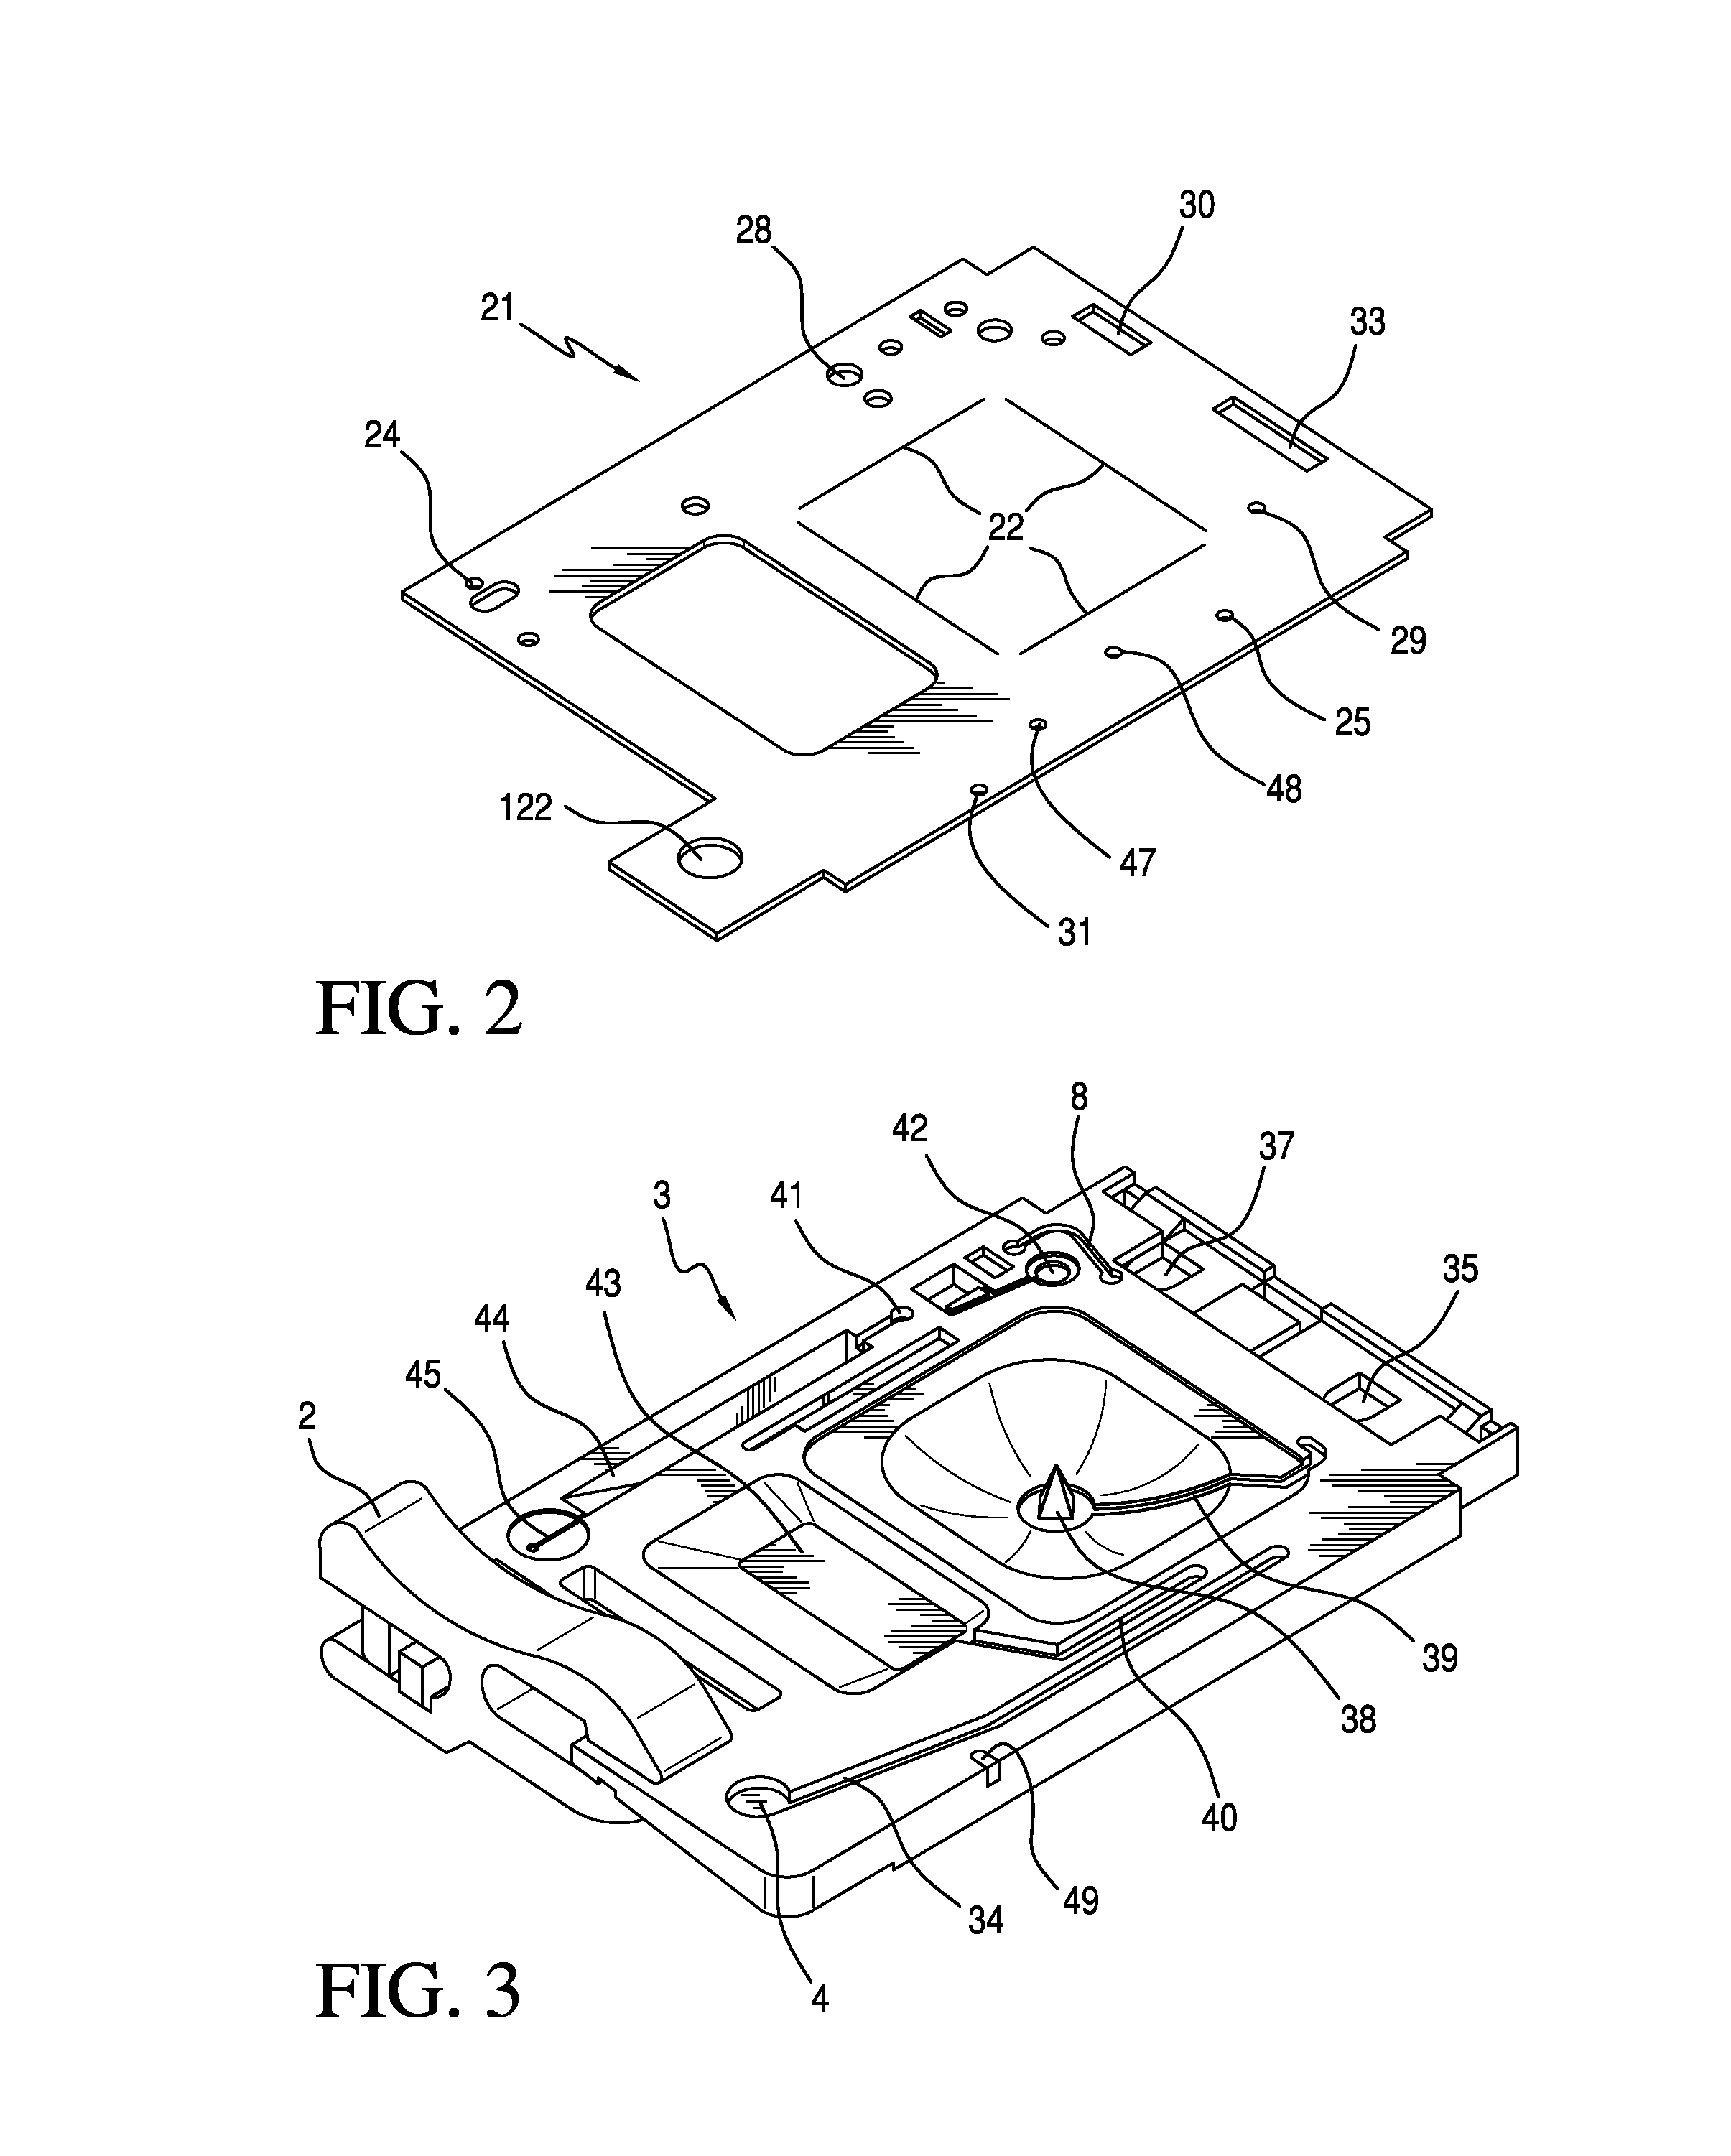 Assay devices with integrated sample dilution and dilution verification and methods of using same